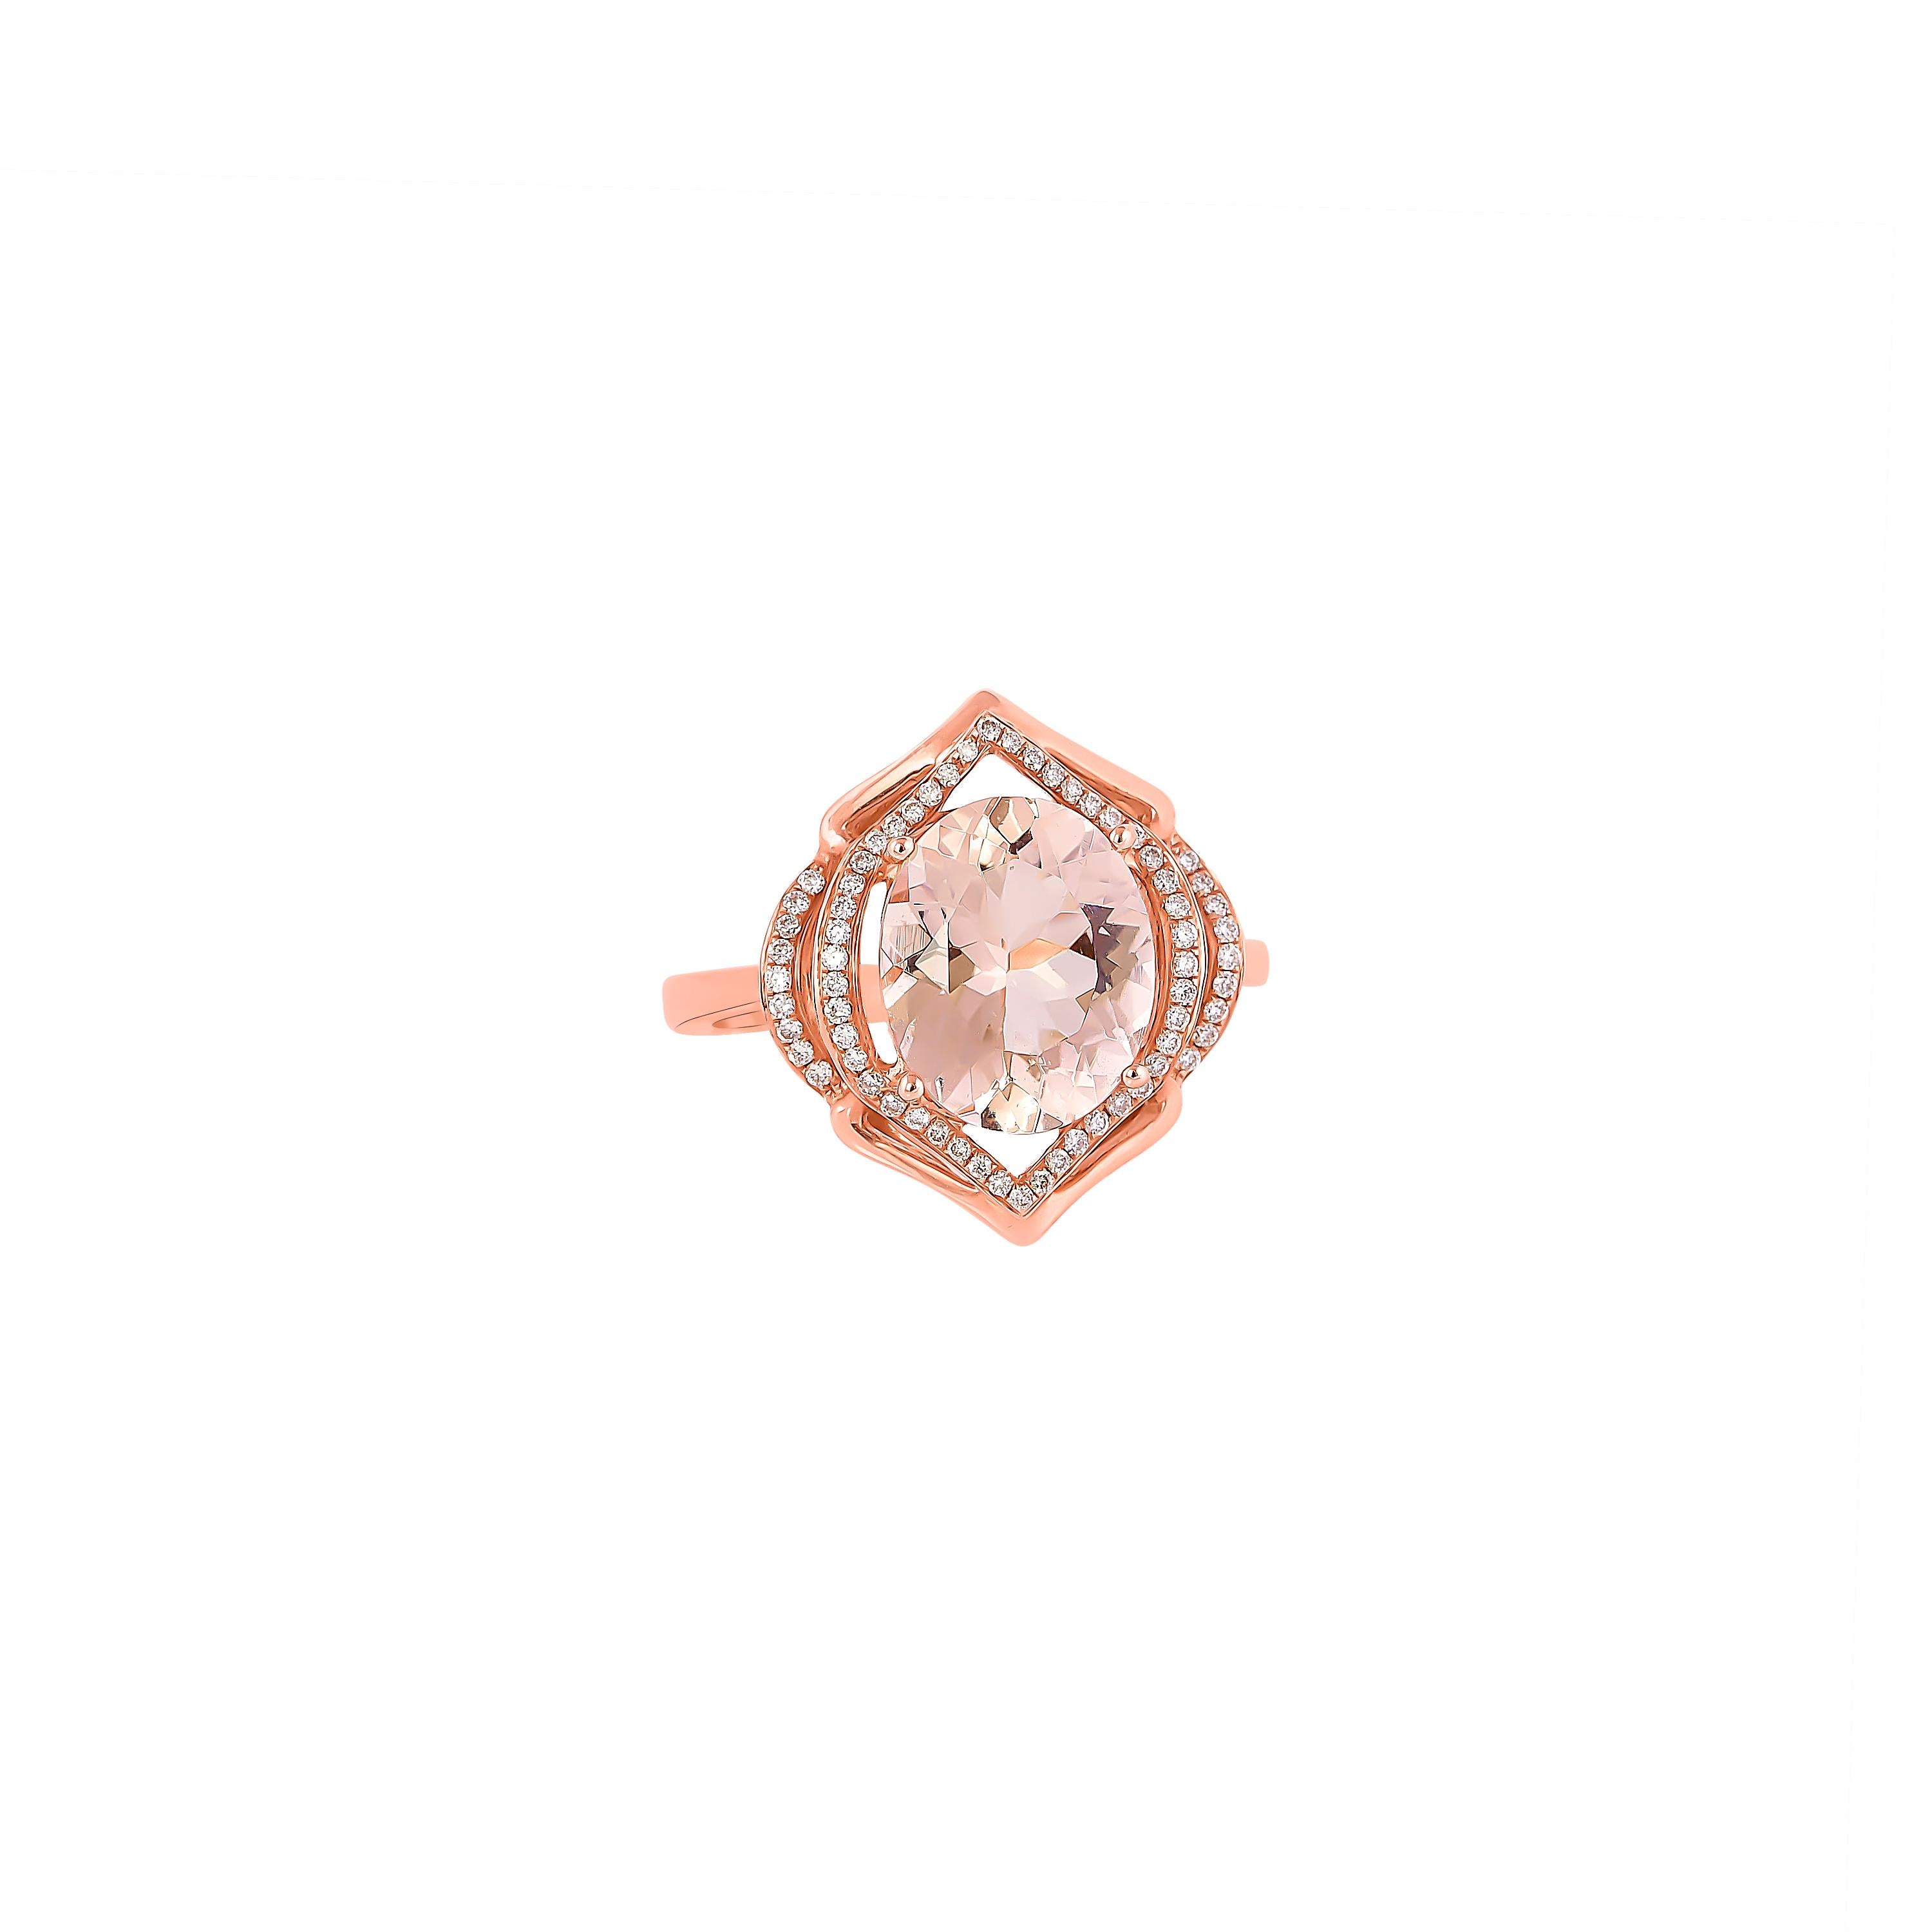 This collection features an array of magnificent morganites! Accented with diamonds these rings are made in rose gold and present a classic yet elegant look. 

Classic morganite ring in 18K rose gold with diamonds. 

Morganite: 2.91 carat oval